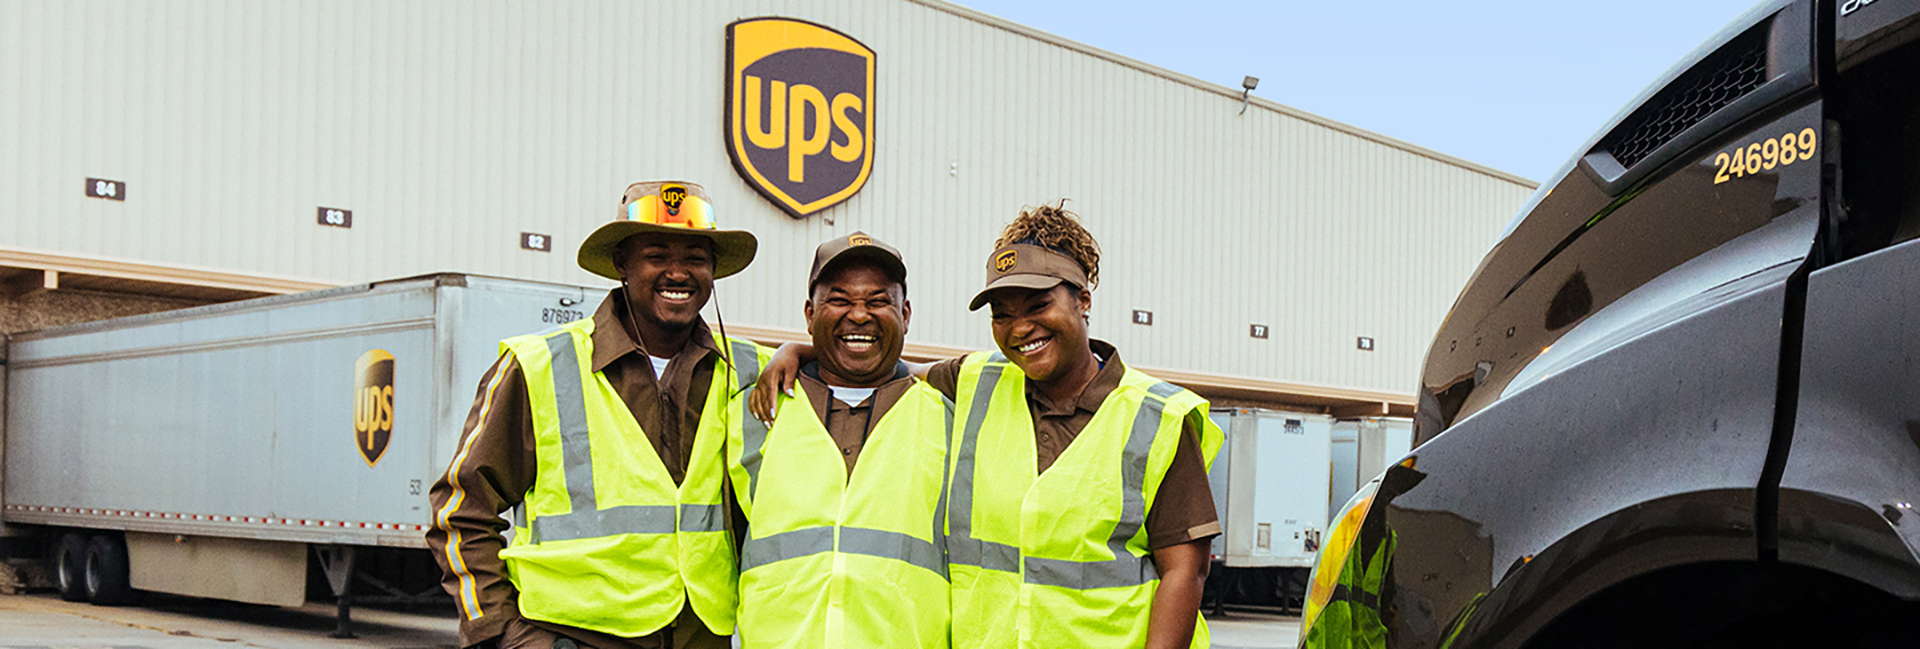 Operating in more than 220 countries and territories, UPS is committed to moving our world forward by delivering what matters.